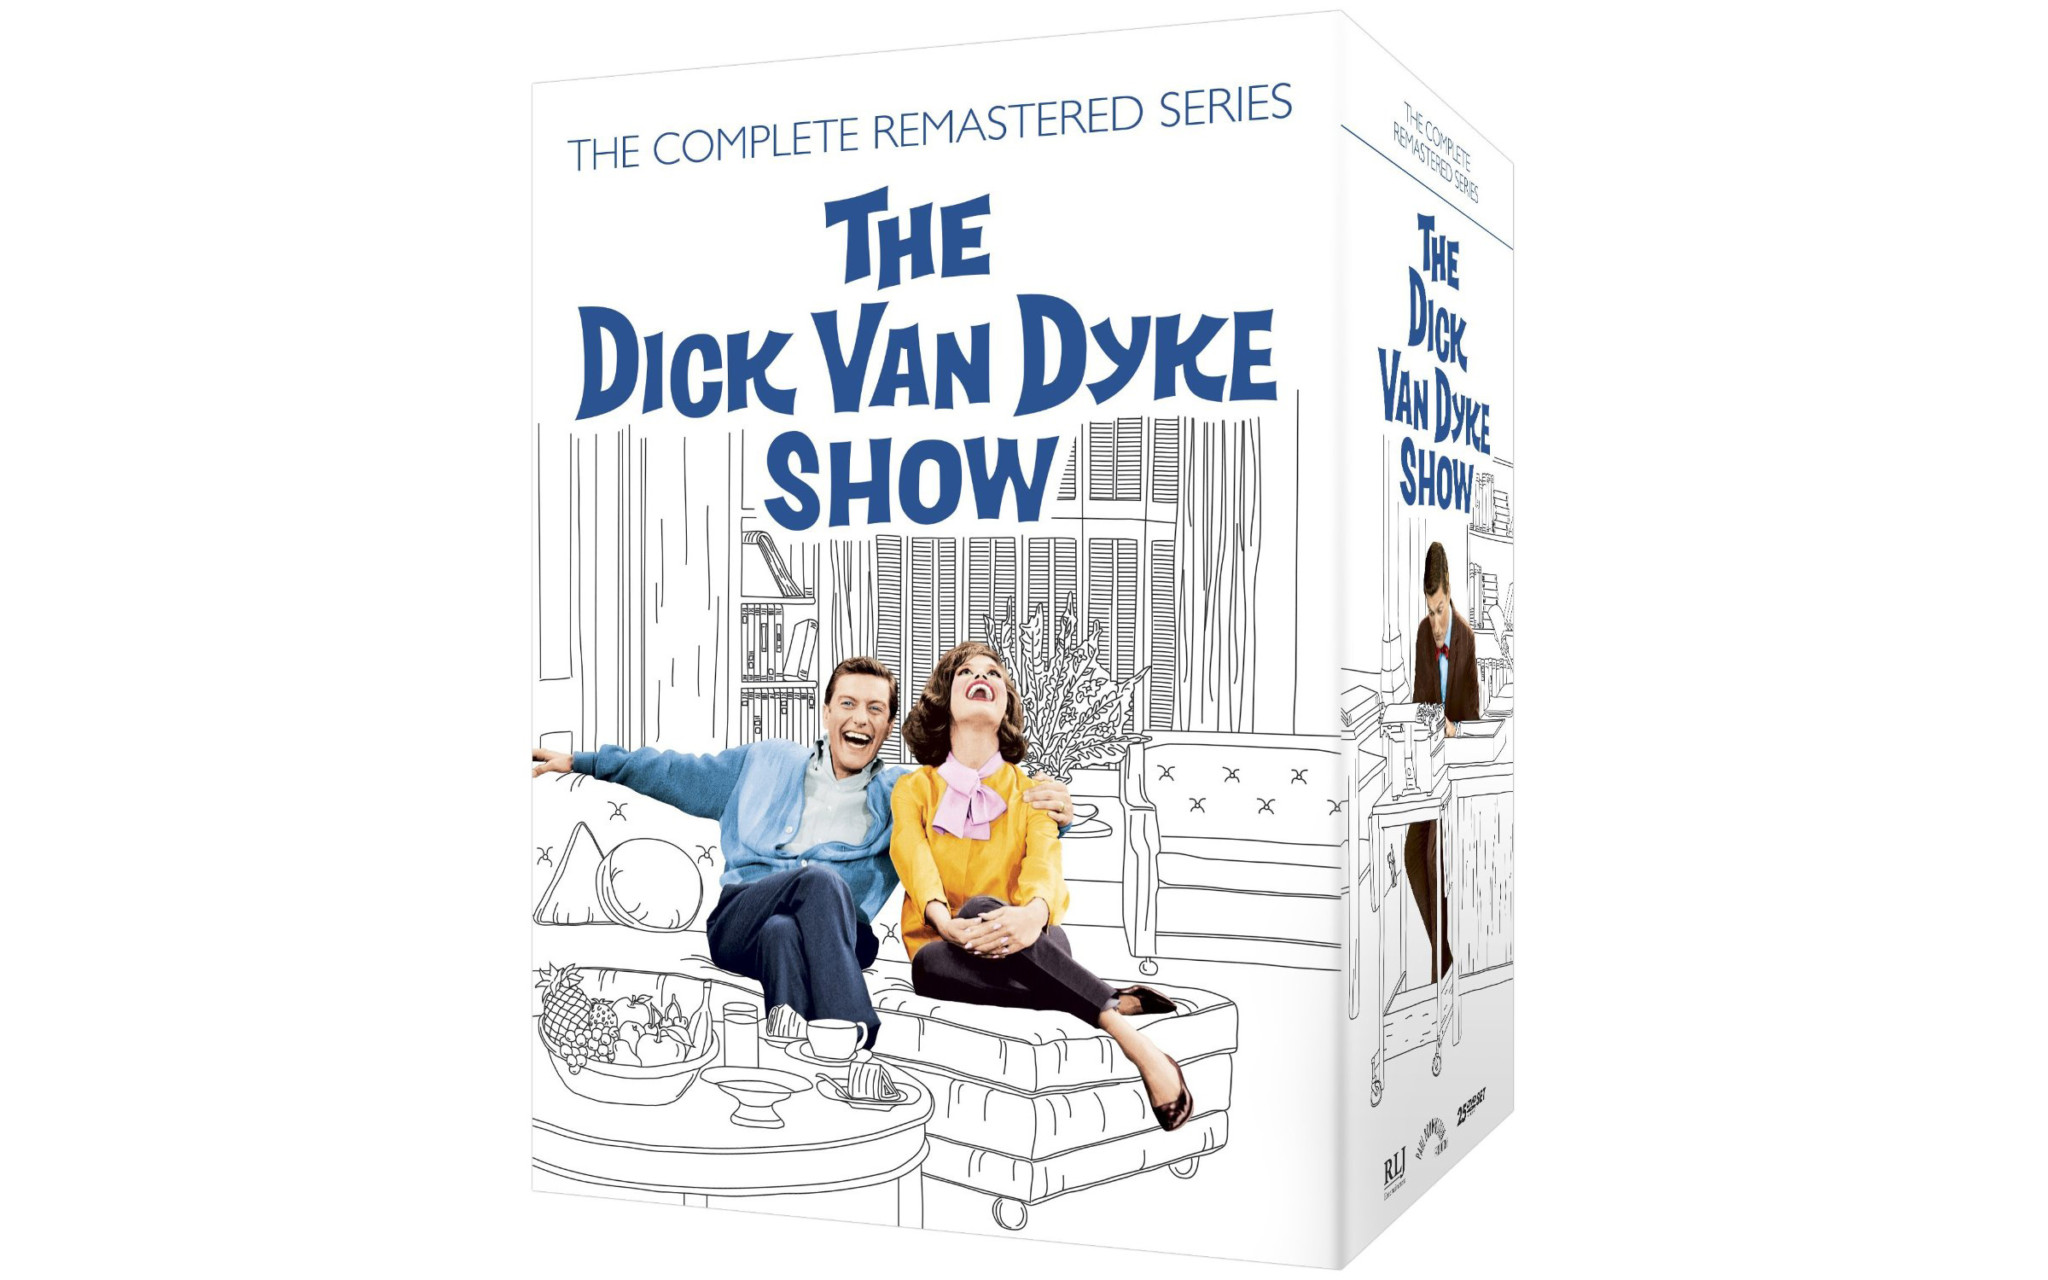 The Dick Van Dyke Show: The Complete Remastered Series